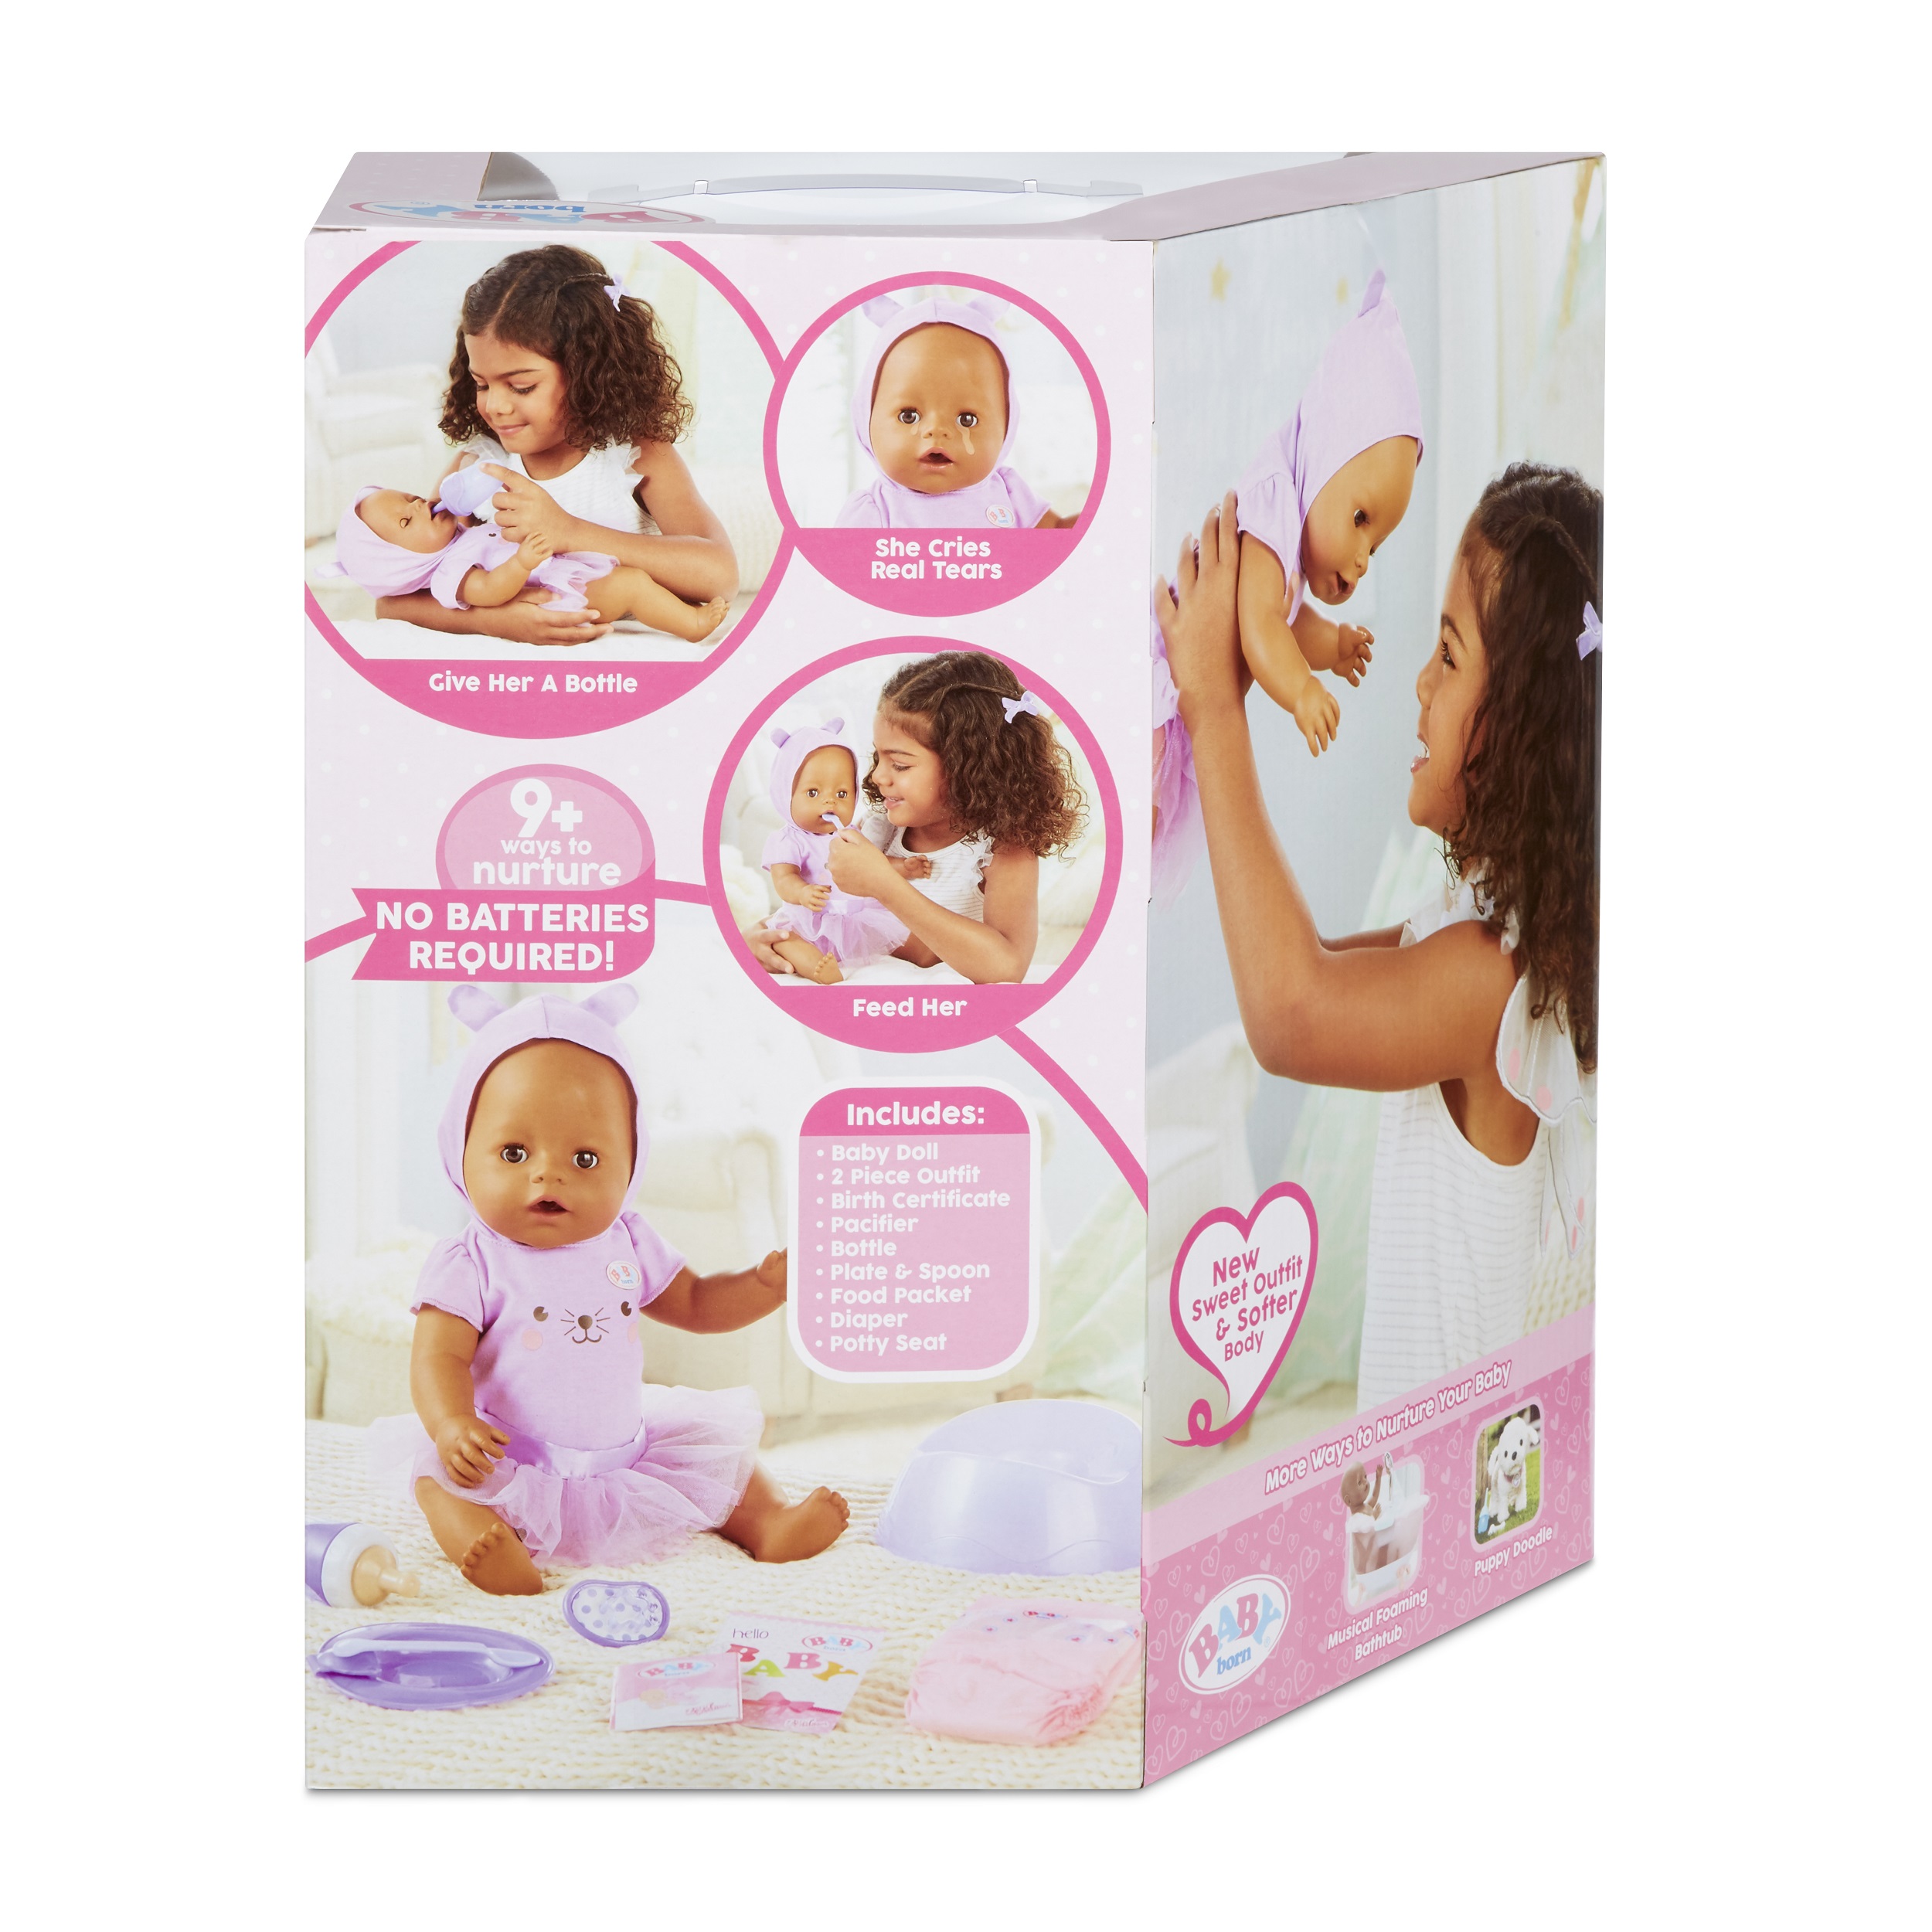 Baby born Interactive Doll Brown Eyes with 9 Ways to Nurture, Eats, Drinks, Cries, Sleeps, Bathes, and Wets - image 3 of 6